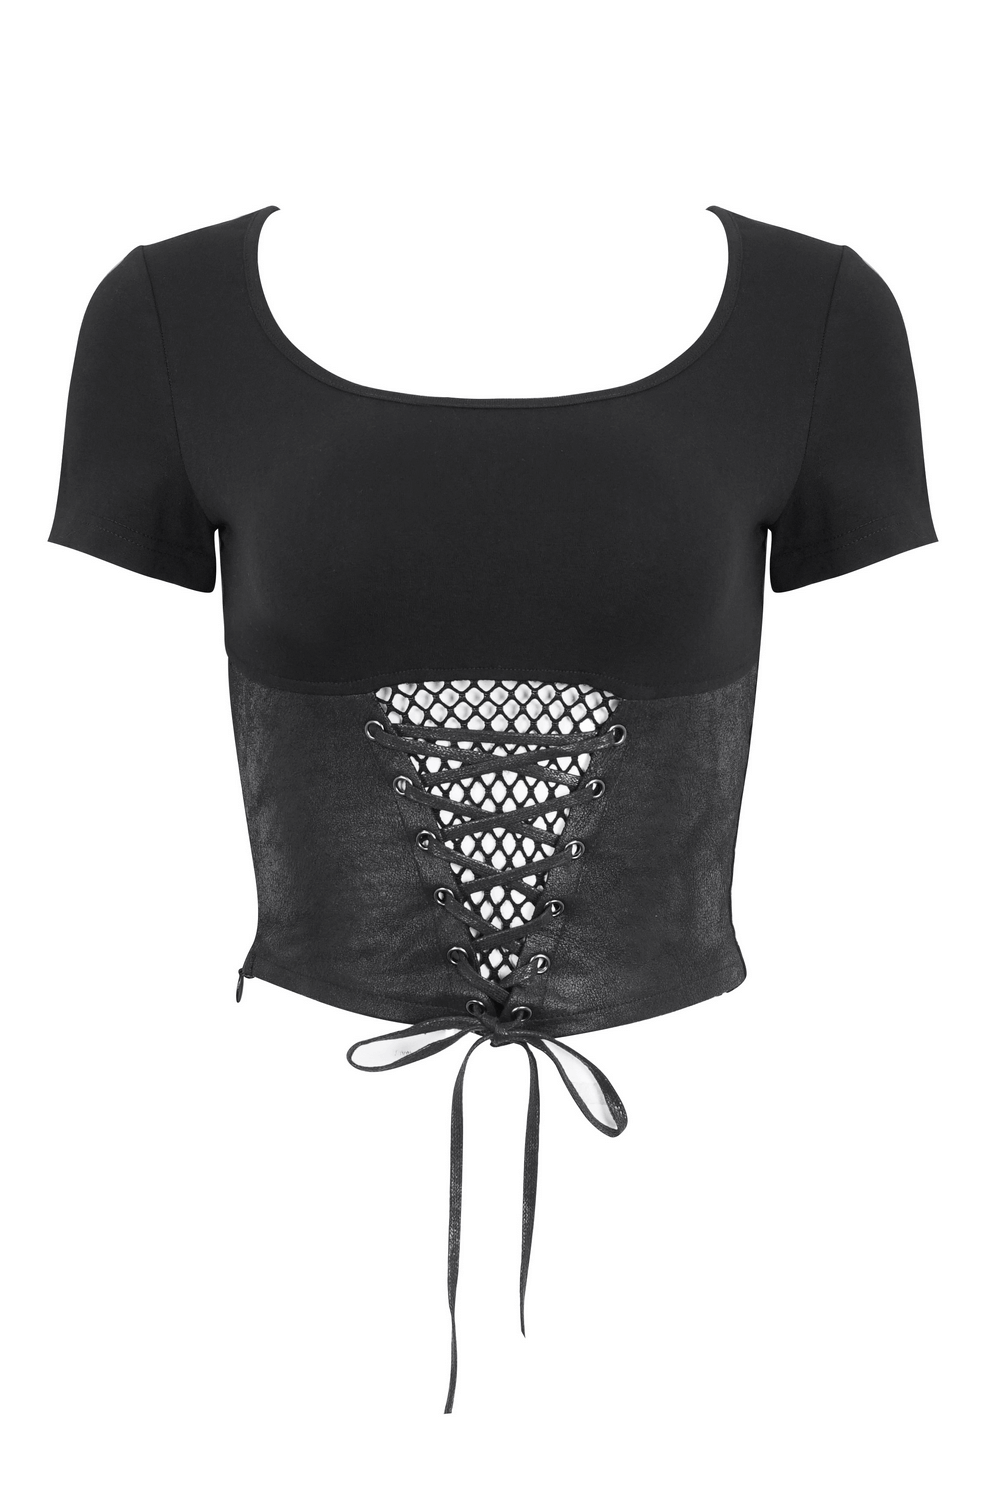 Gothic Chain Detail Crop Top with Shoulders Accessory